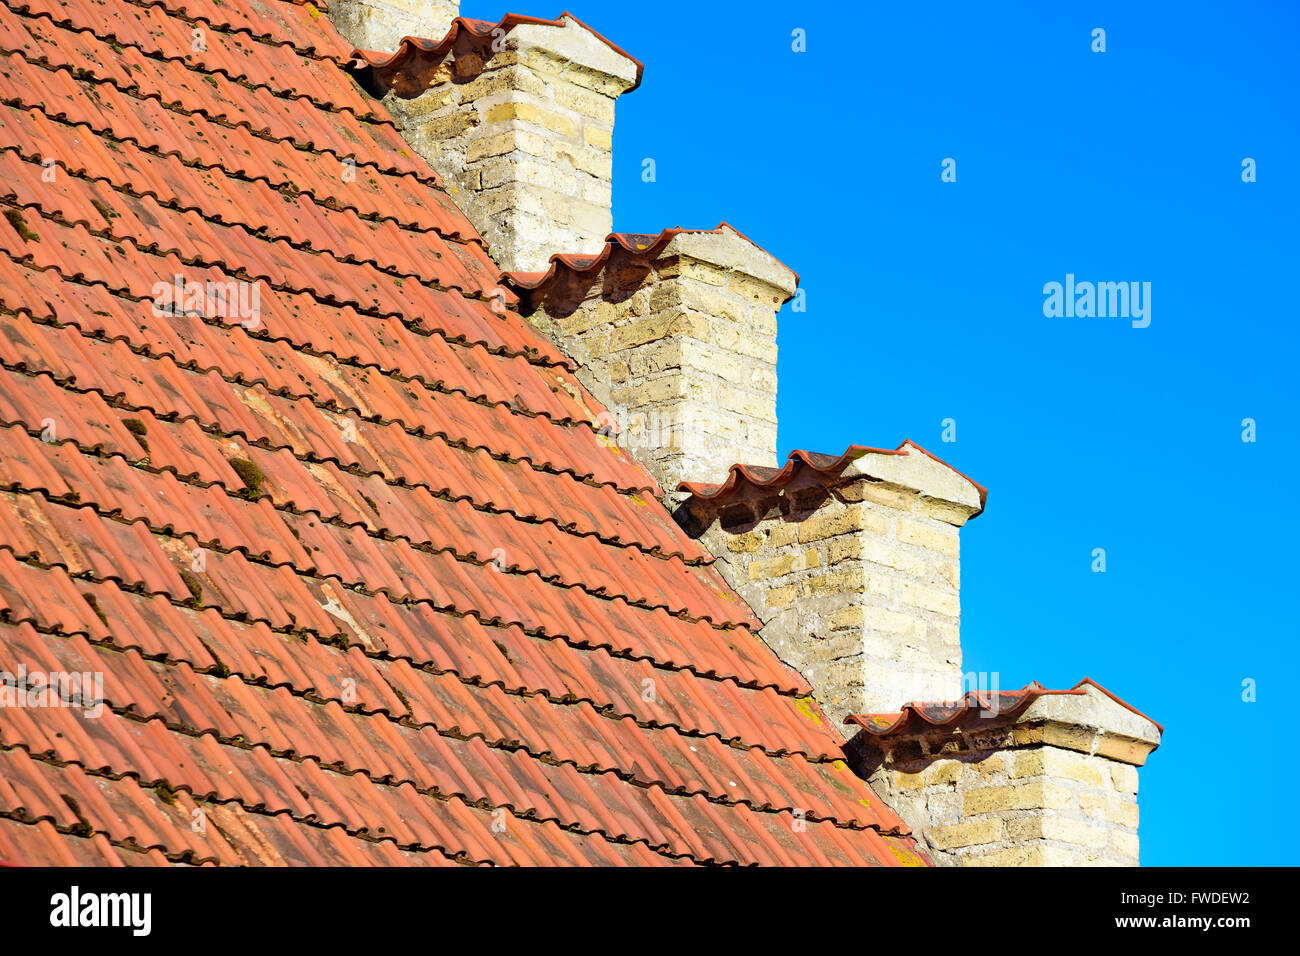 Lovely architectural detail of an old brick house where the yellow facade meets the red tiled roof. Stock Photo